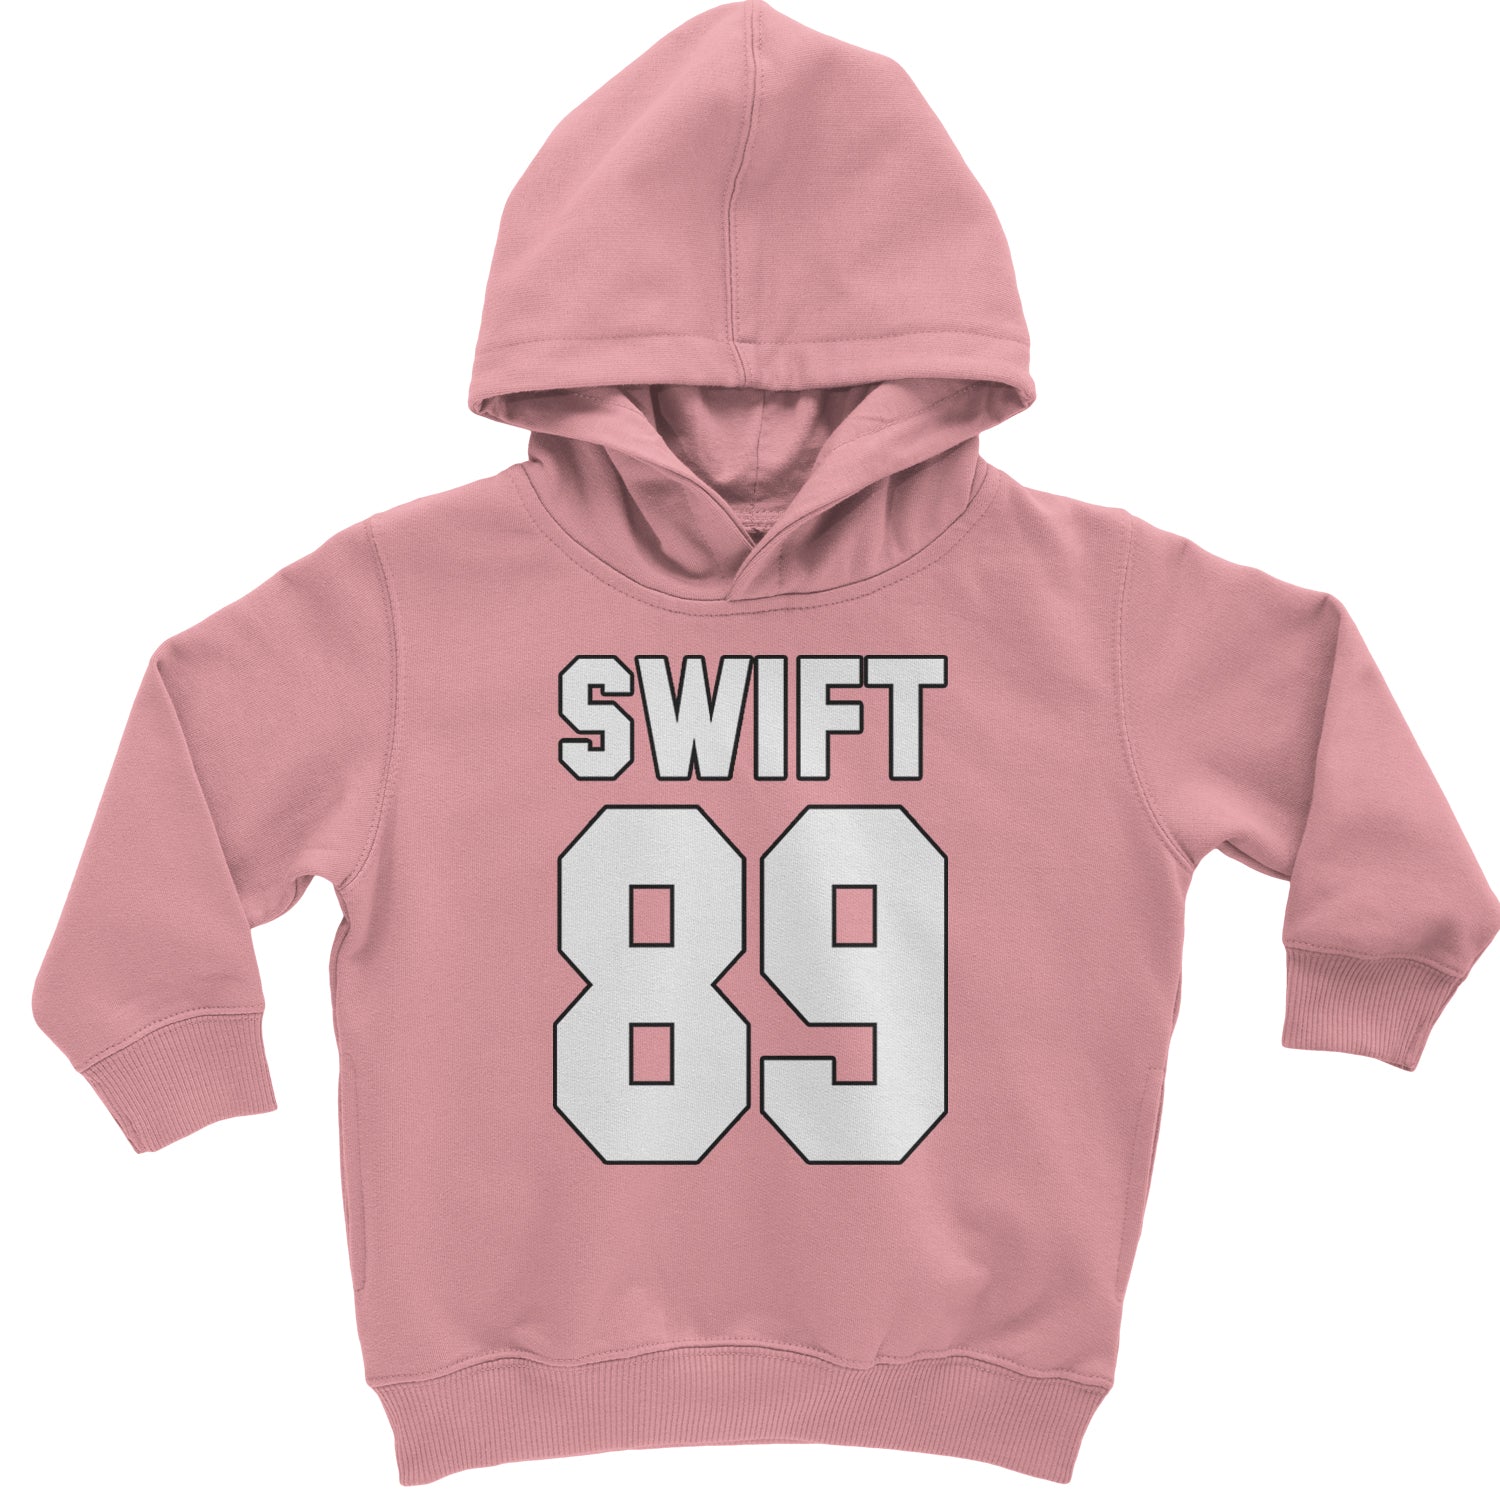 Swift 89 Birth Year Music Fan Era Poets Department Lover Toddler Hoodie And Infant Fleece Romper